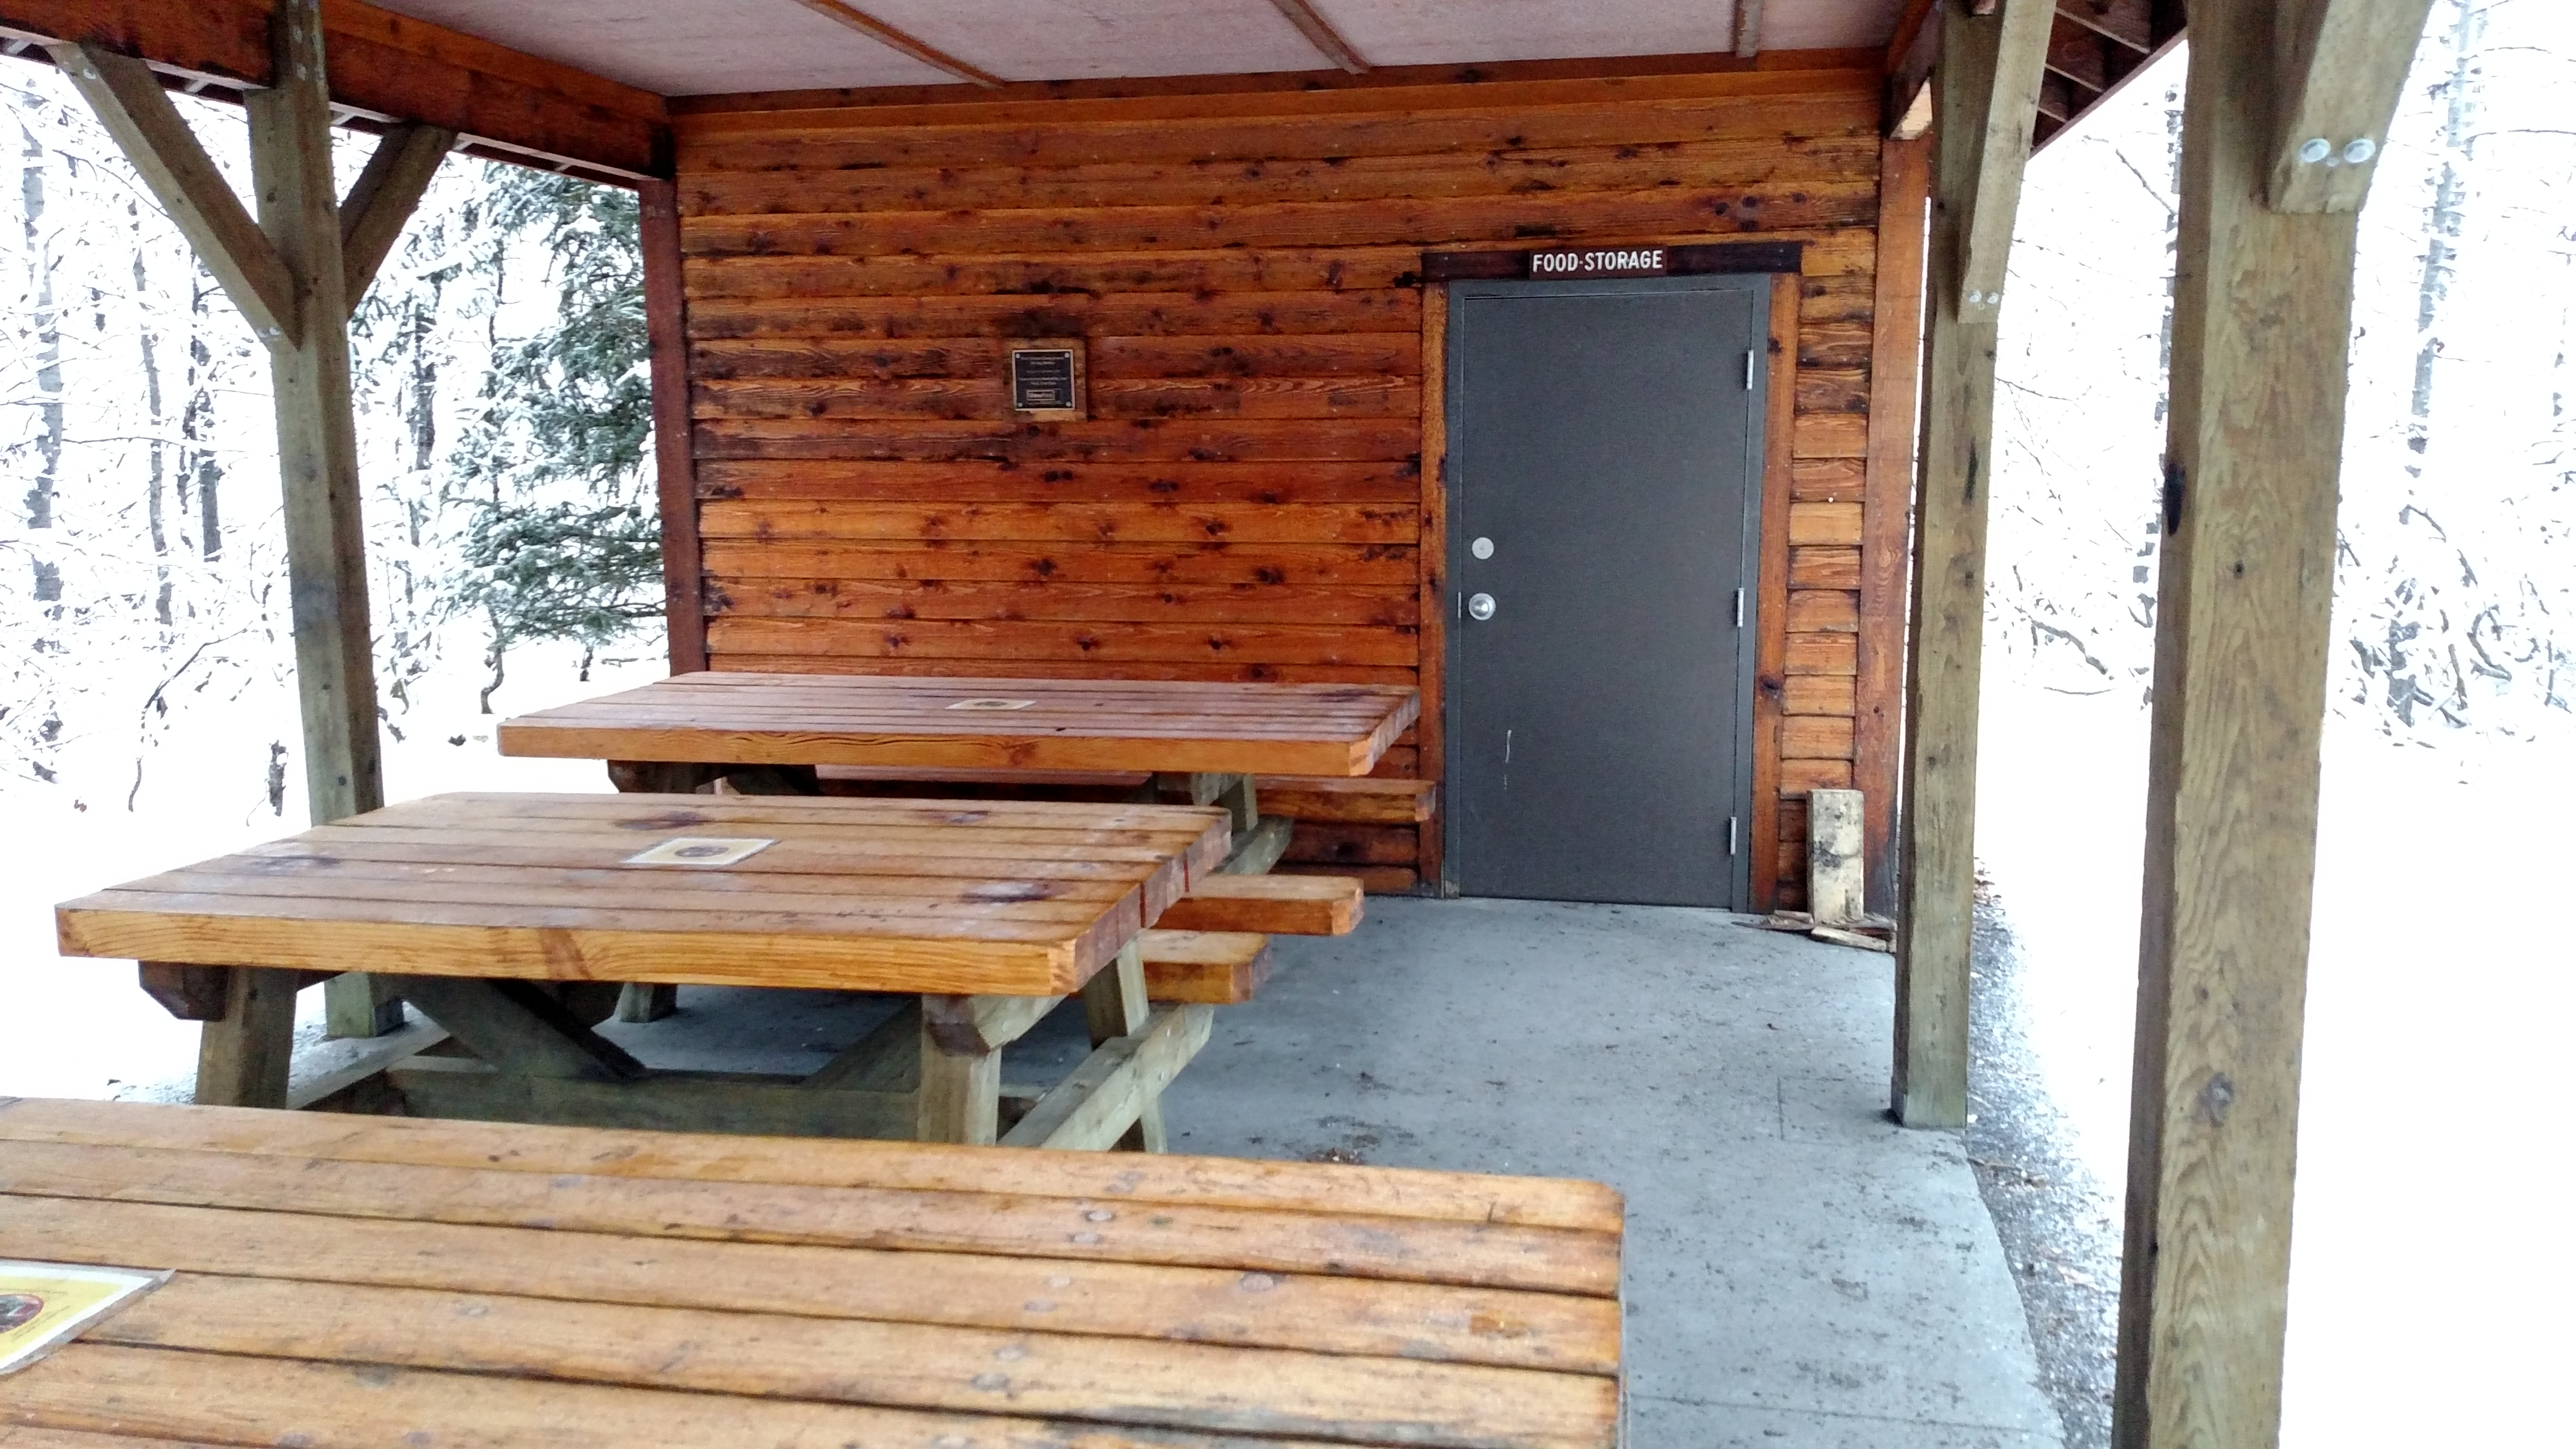 cook shelter with picnic tables and food storage closet.